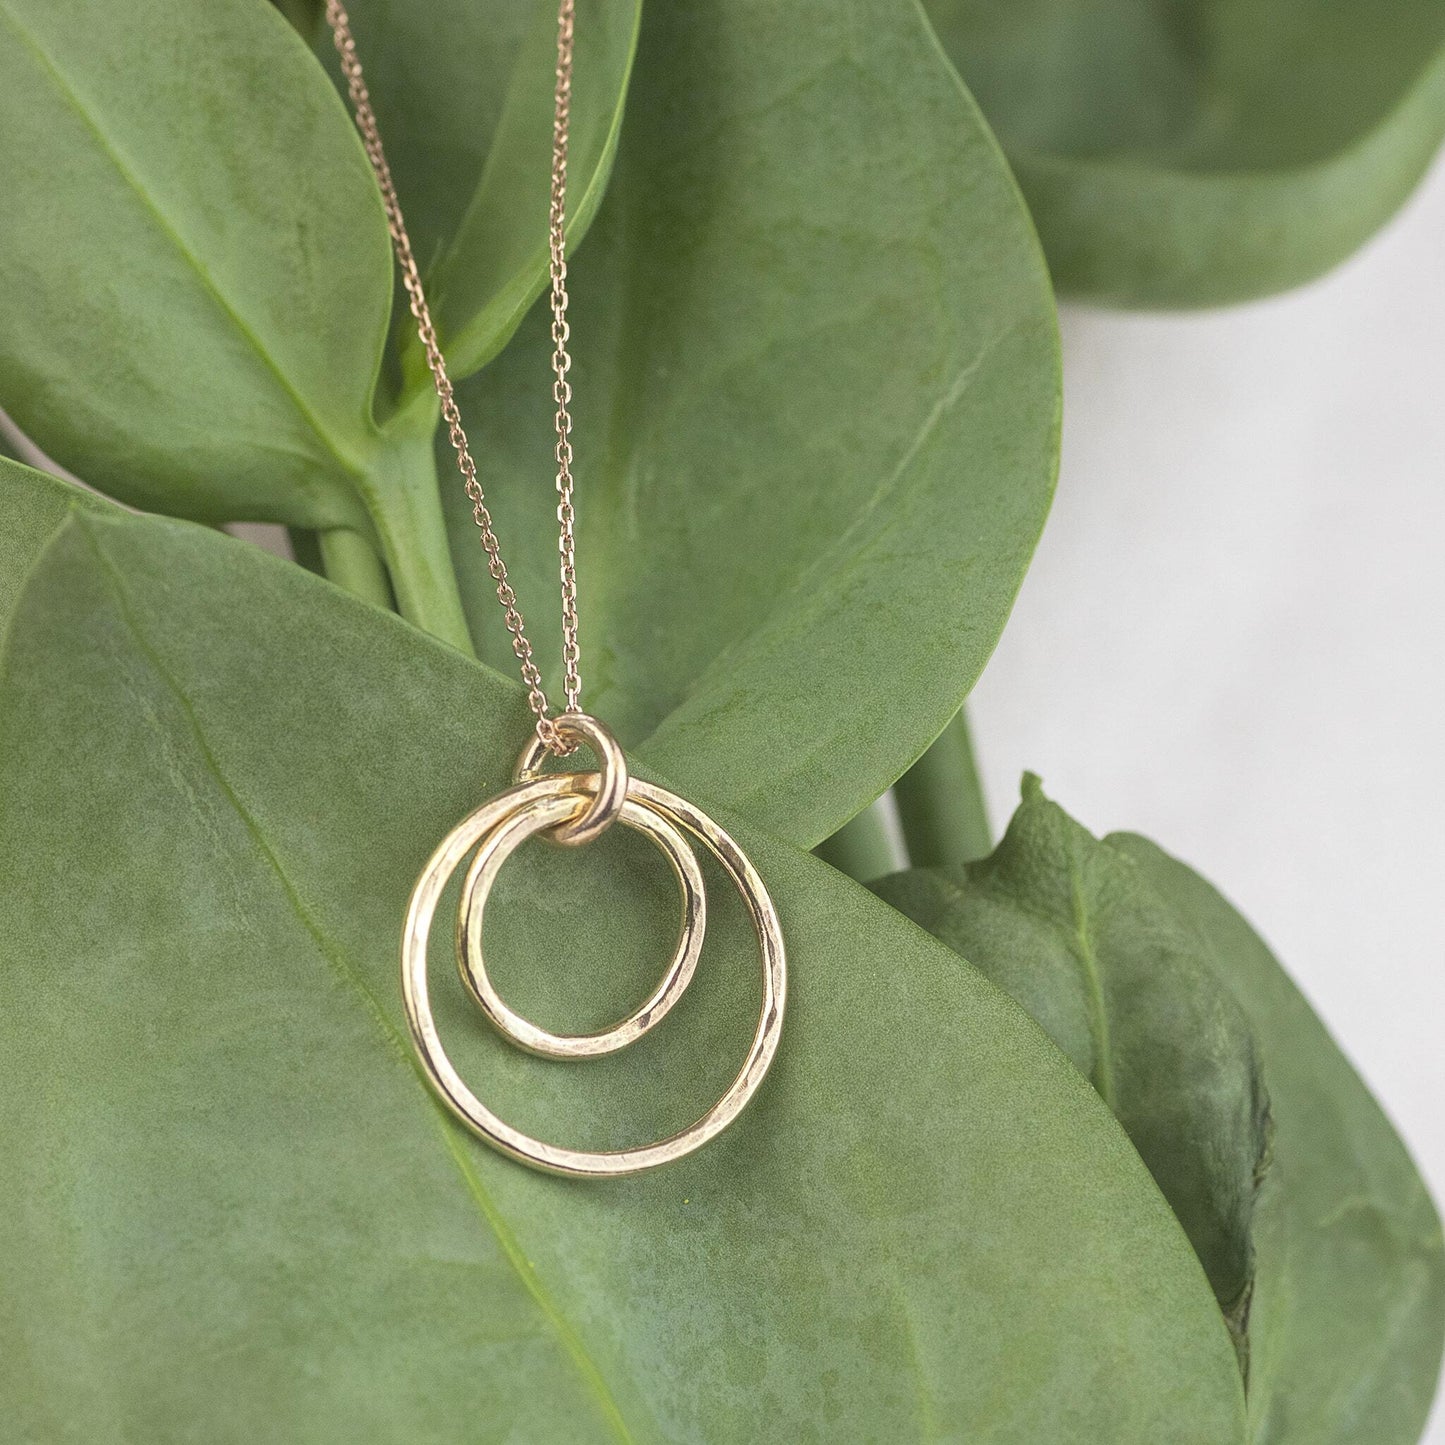 Double Circle Necklace for Loved One - Forever Encircled With Love - 9kt Gold